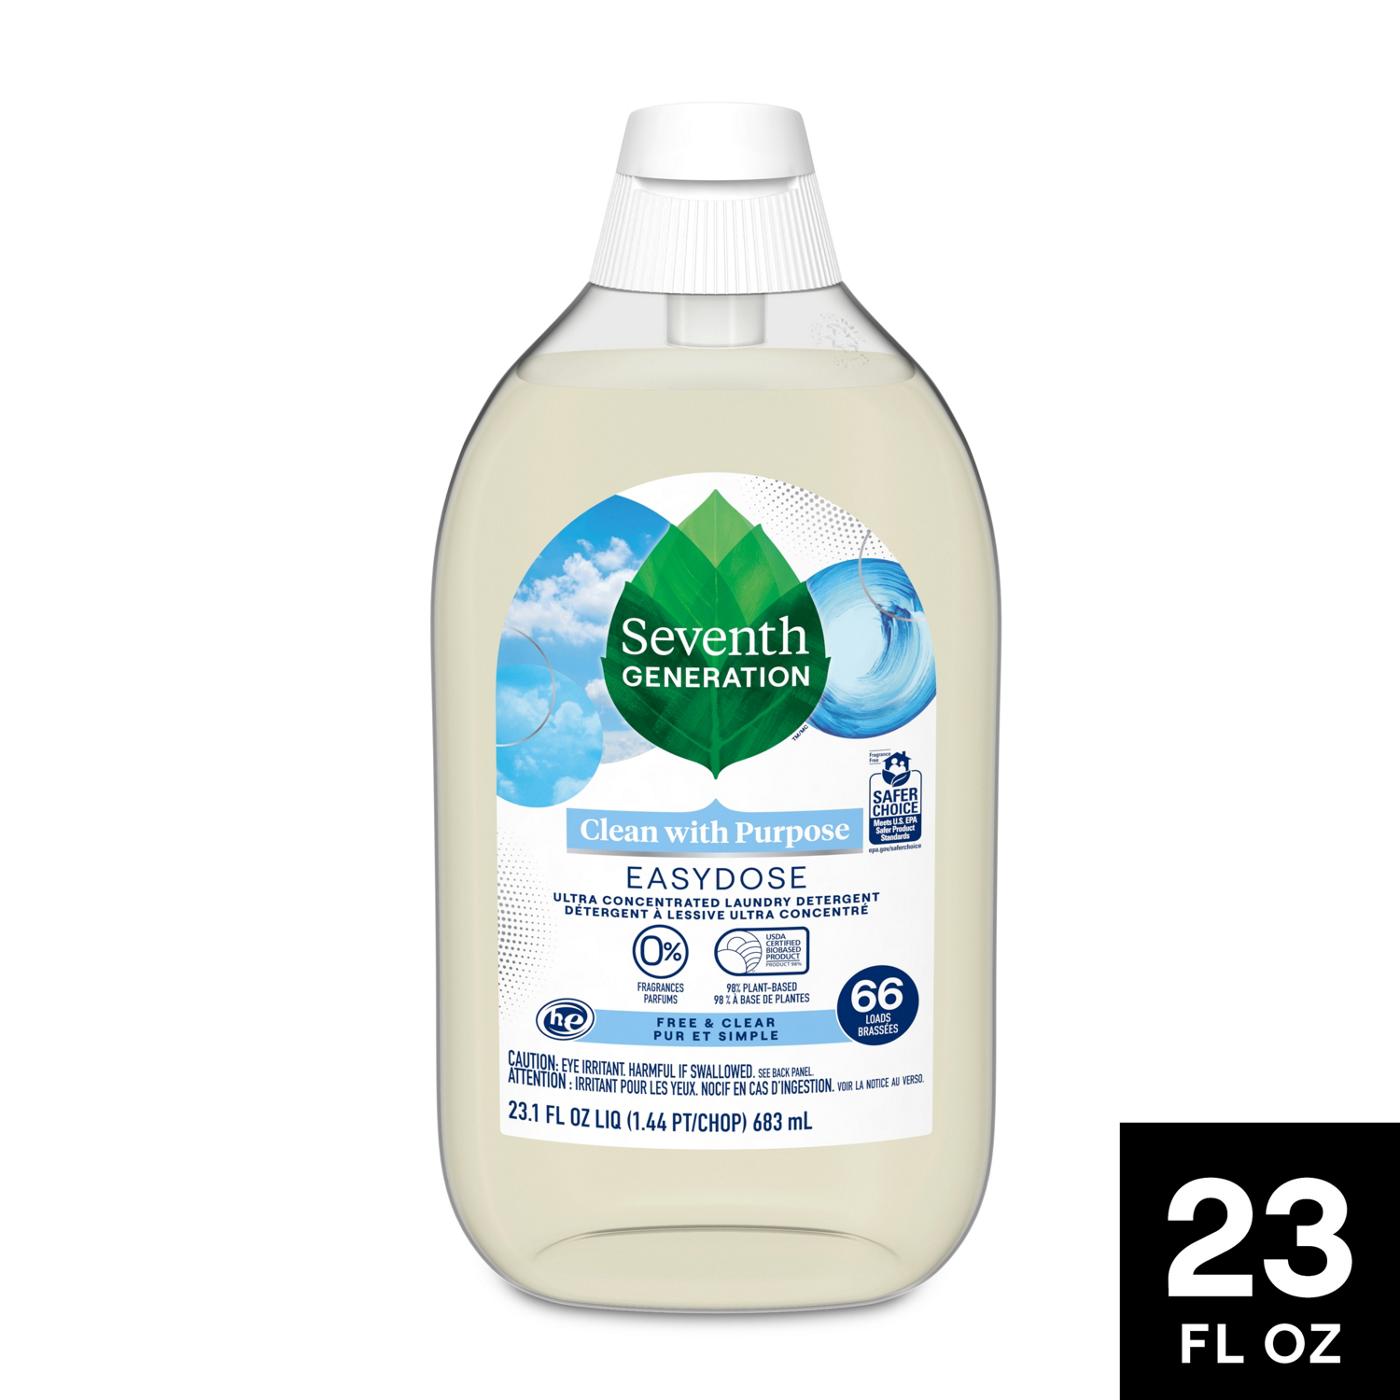 Seventh Generation EasyDose Ultra Concentrated HE Laundry Detergent, 66 Loads - Free & Clear; image 5 of 14